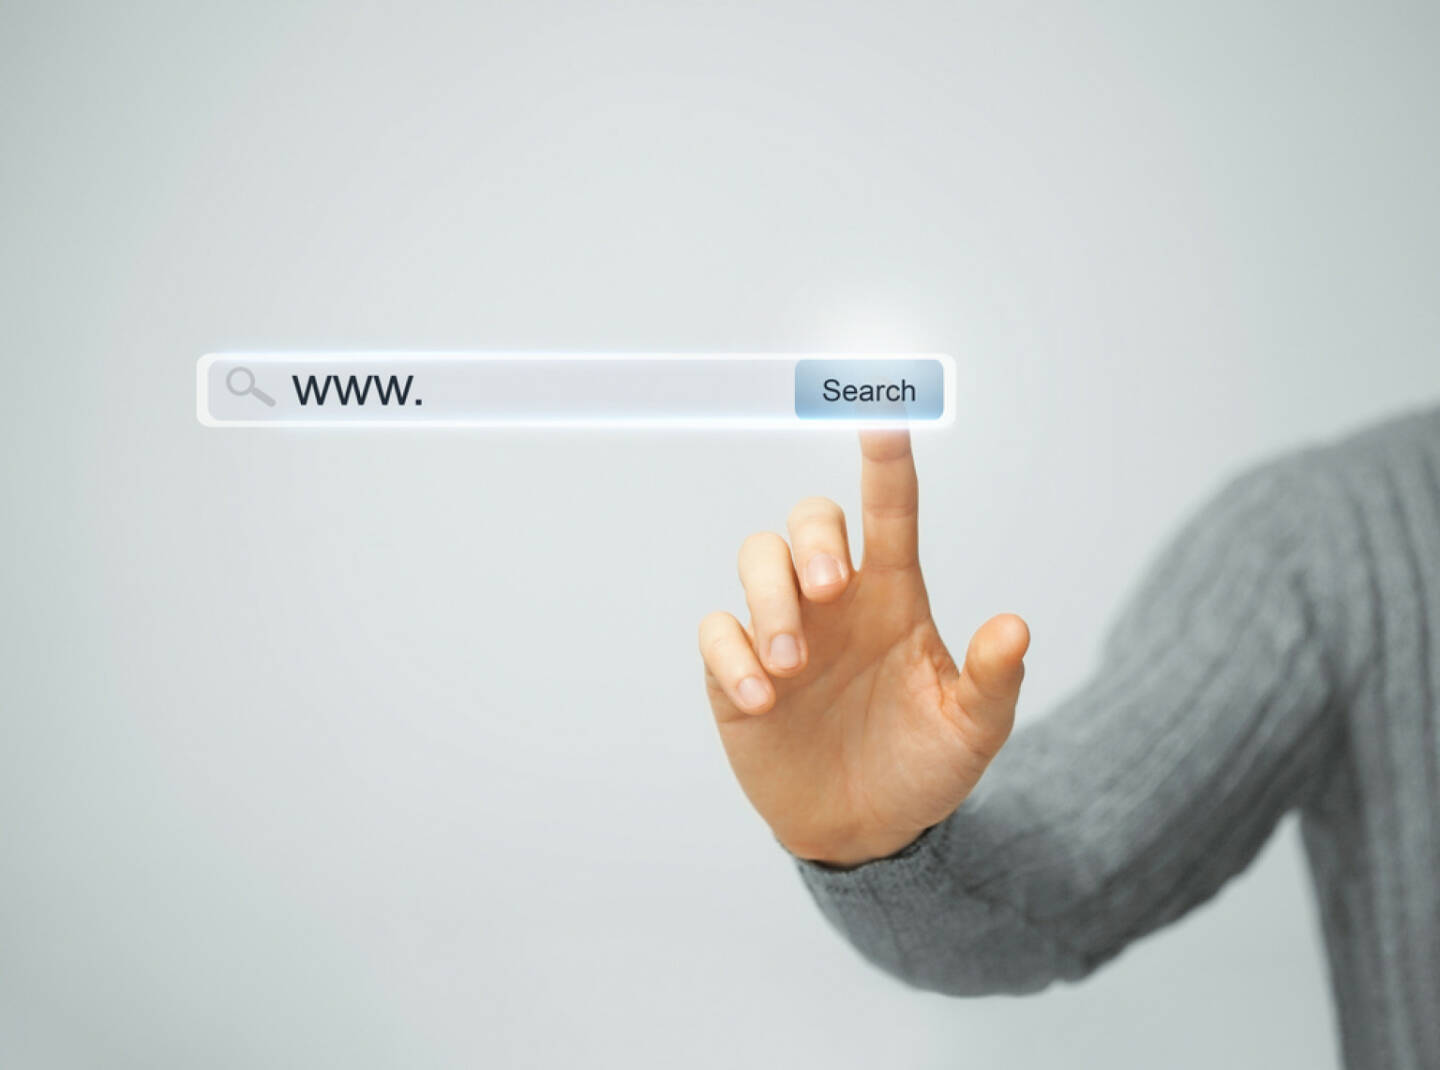 Internet, browser, suchen, search, www, http://www.shutterstock.com/de/pic-152012018/stock-photo-technology-searching-system-and-internet-concept-male-hand-pressing-search-button.html